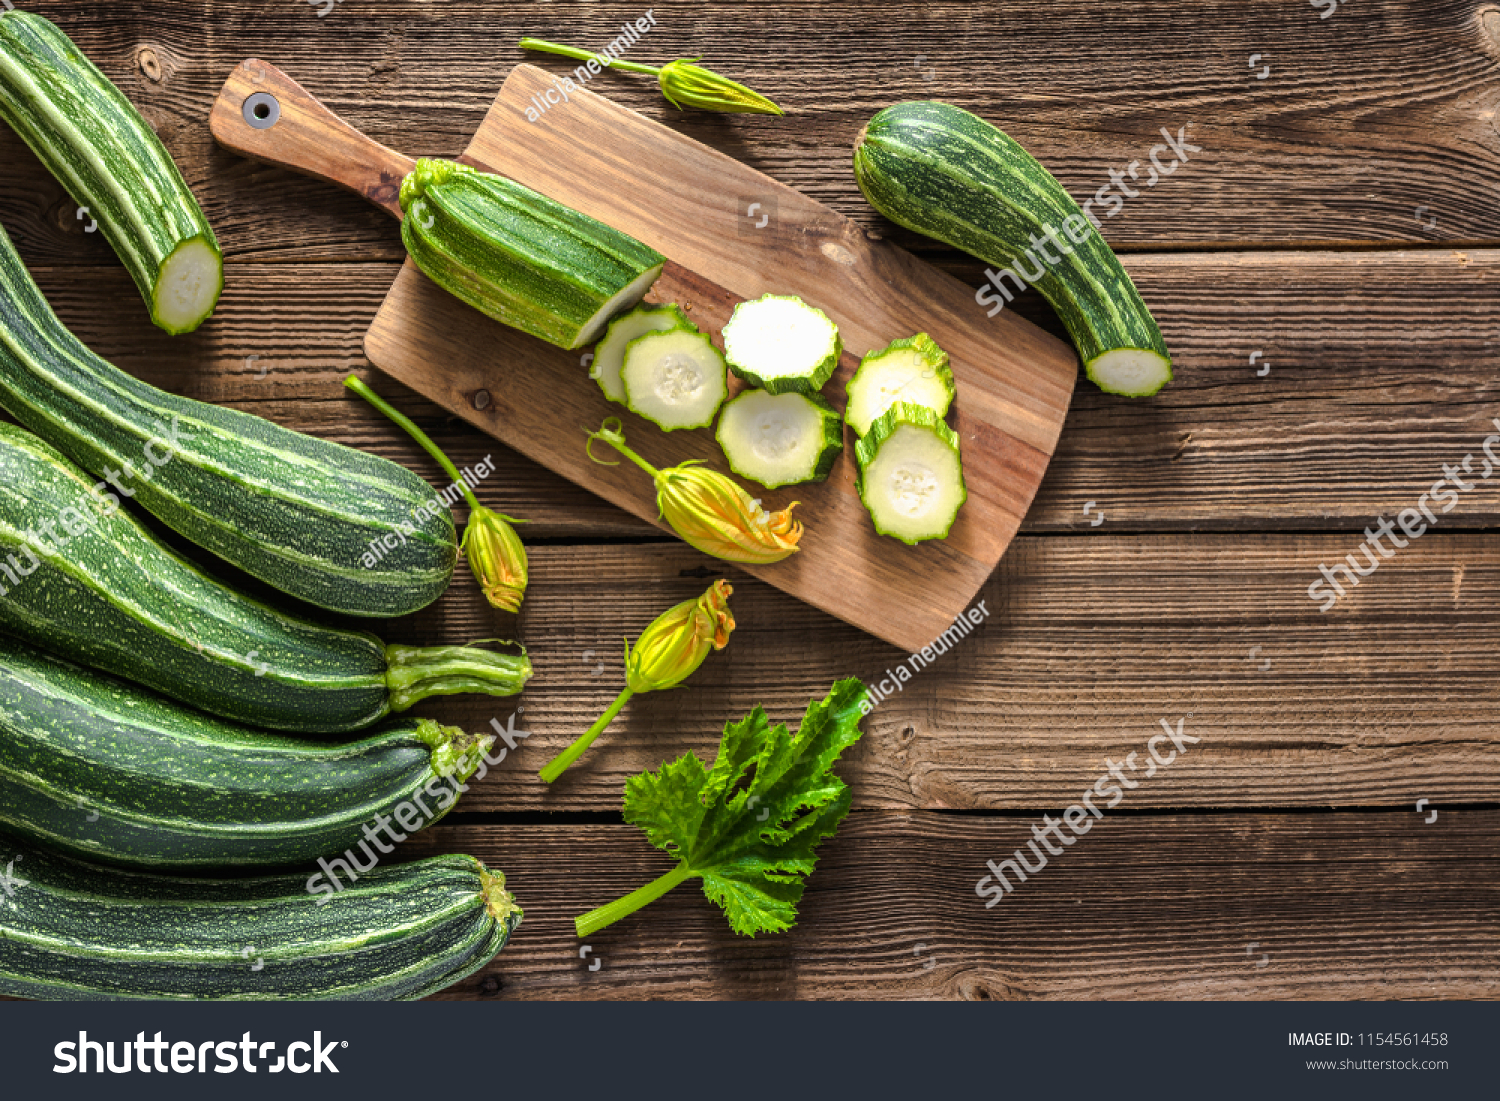 Fresh zucchini and slices of zucchinis on wooden table. Sliced courgette, healthy vegan diet or vegetarian food, cooking concept. #1154561458